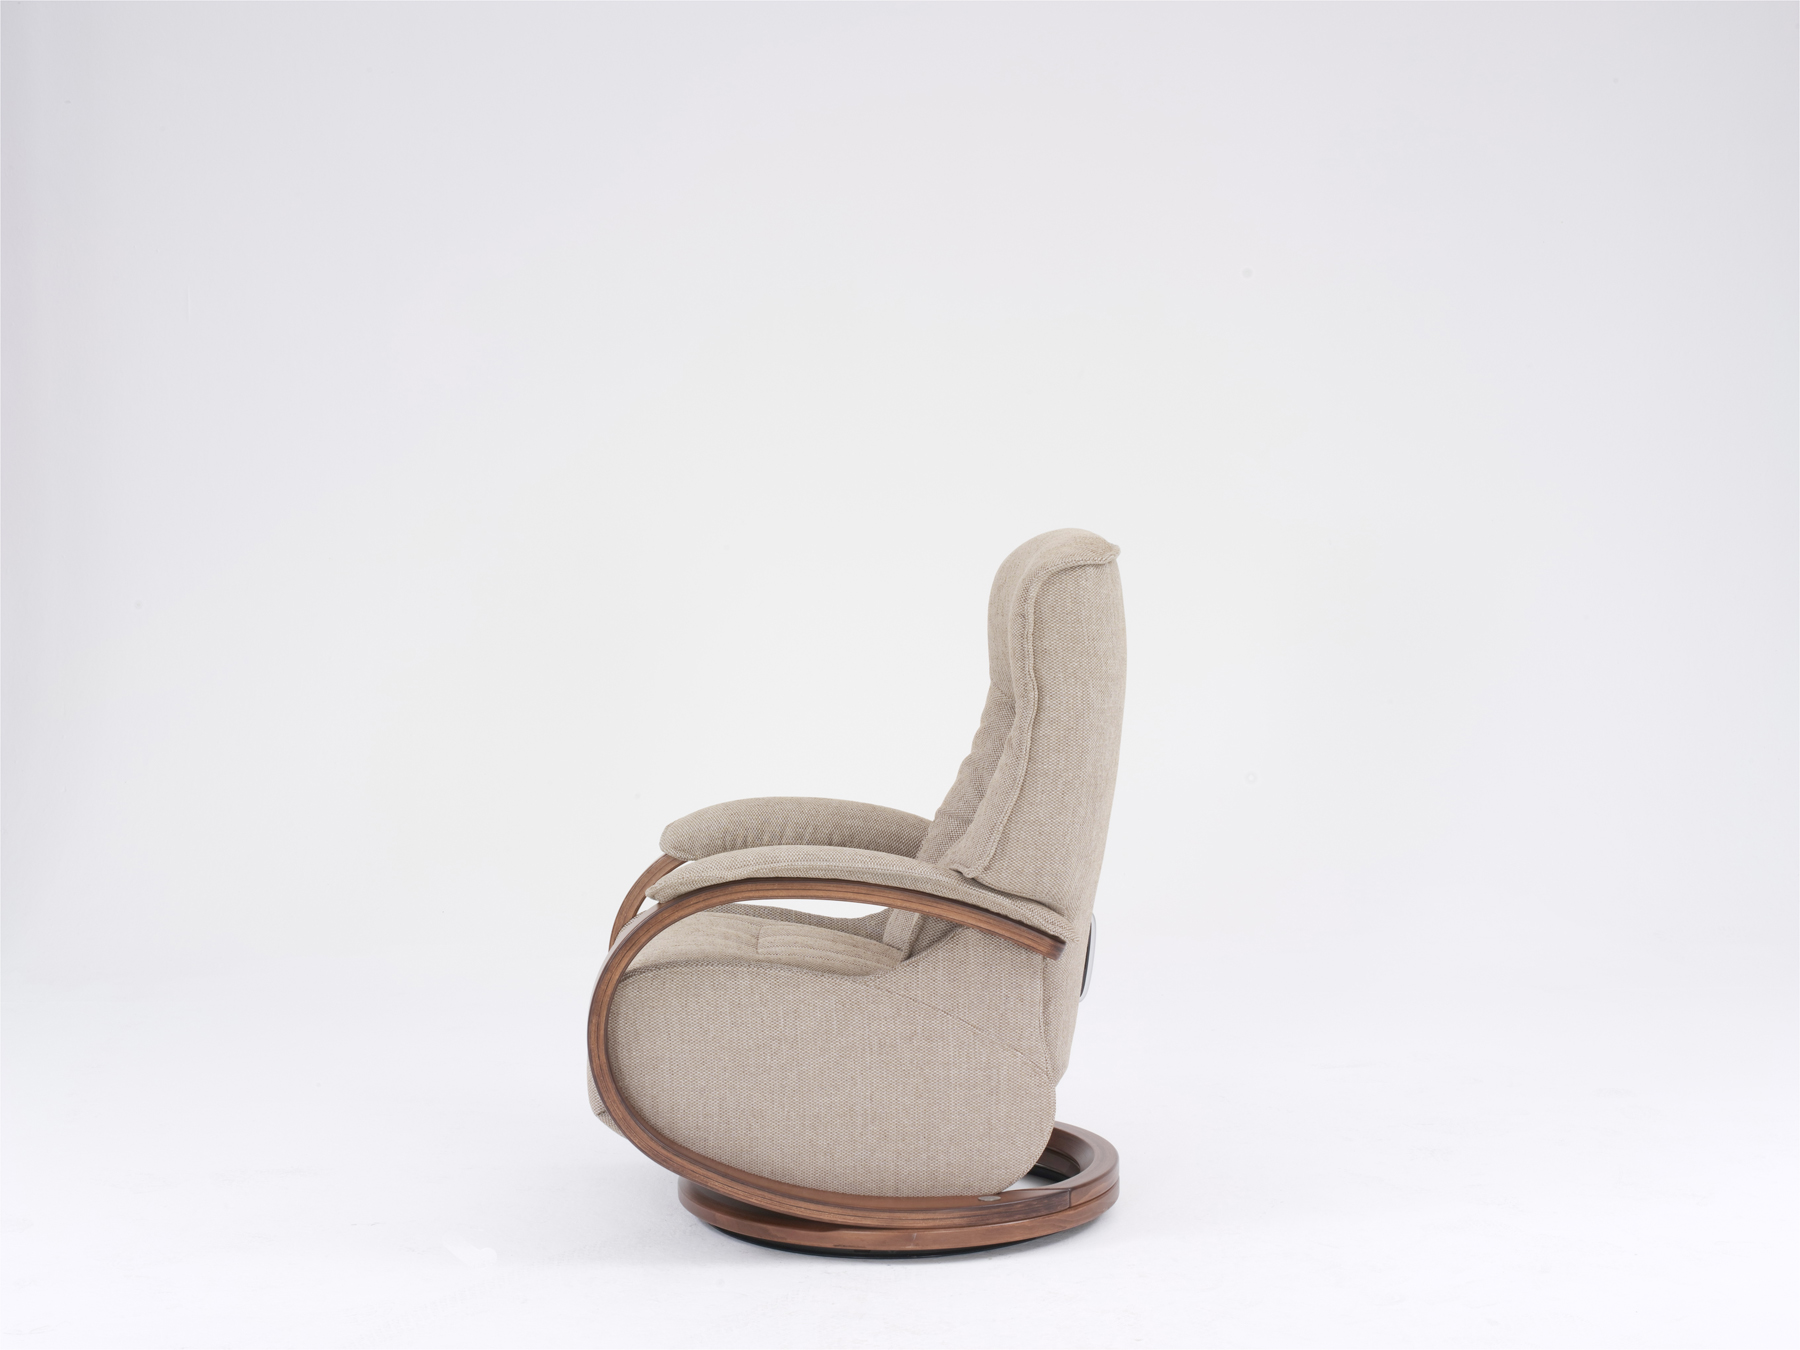 HIMOLLA MOSEL FABRIC CHAIR FULL SIDE VIEW